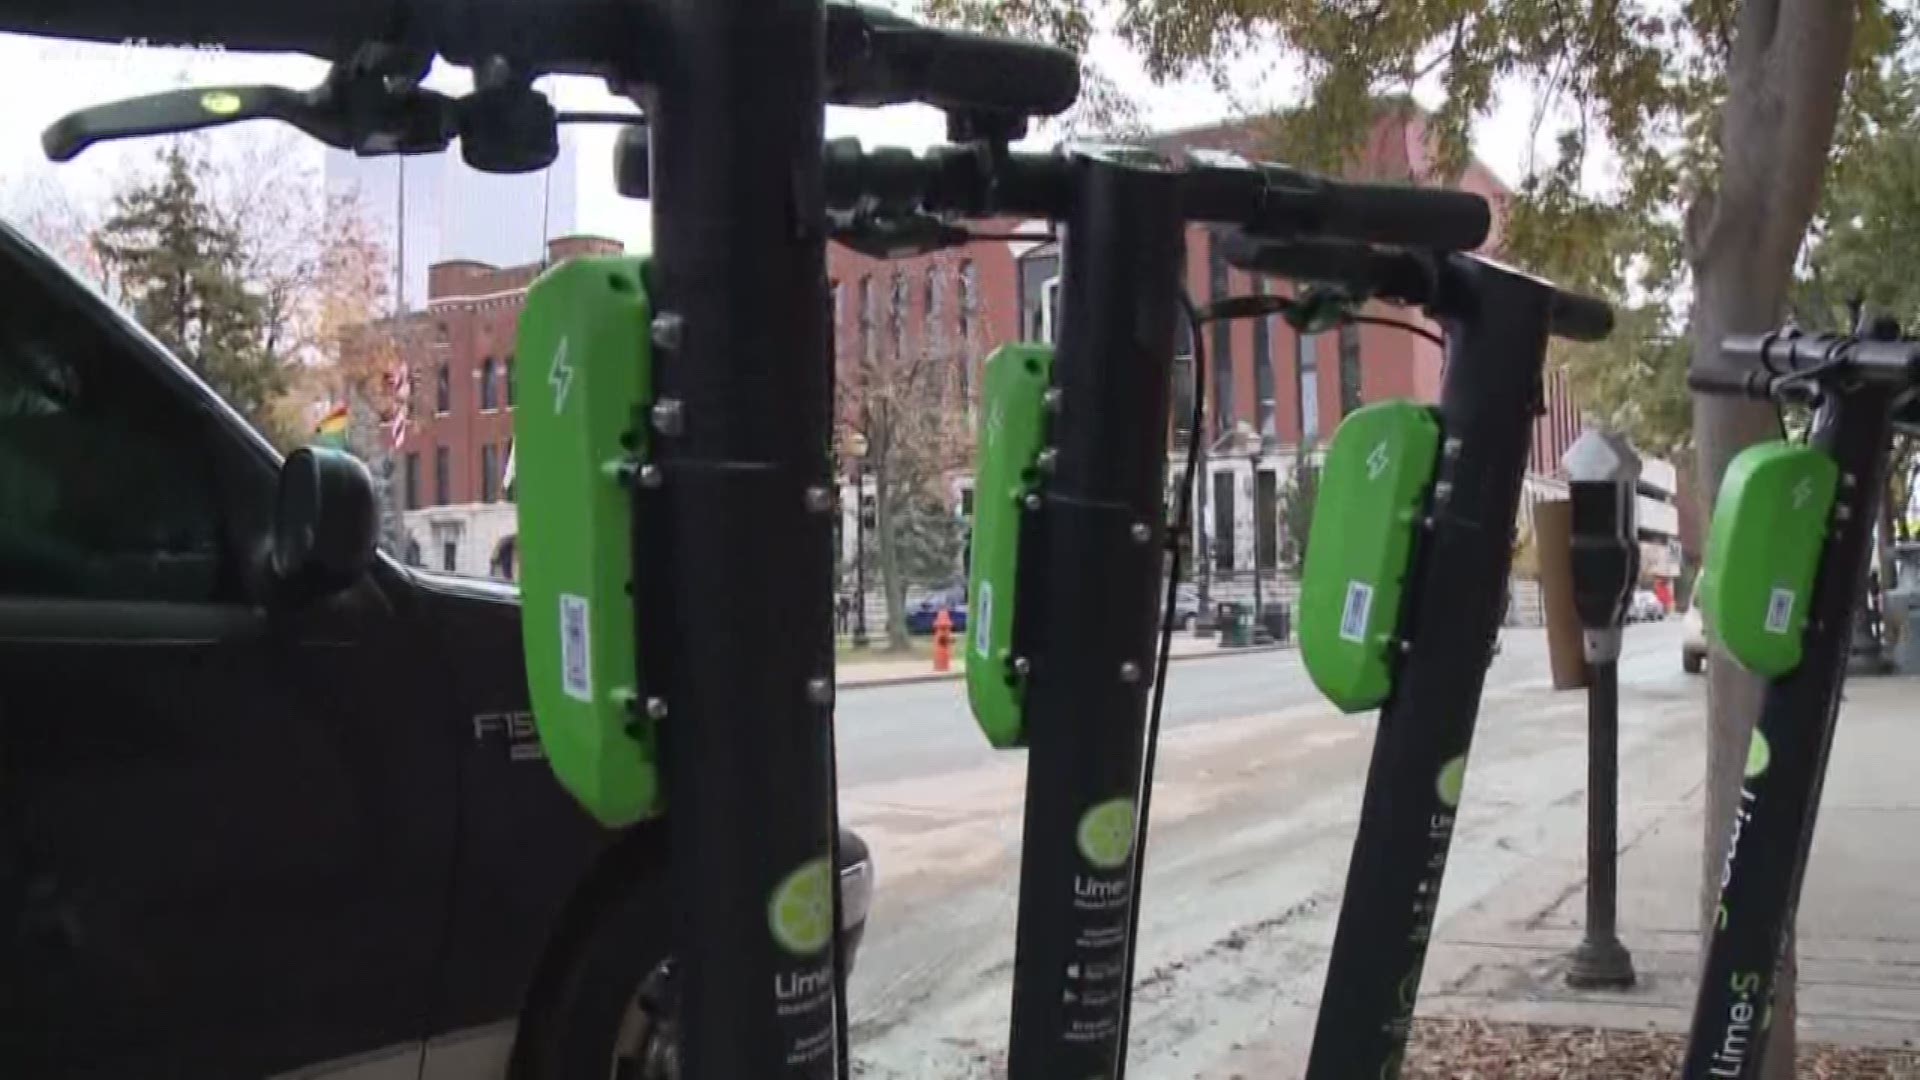 There is a new push to get electric scooters off Louisville sidewalks.